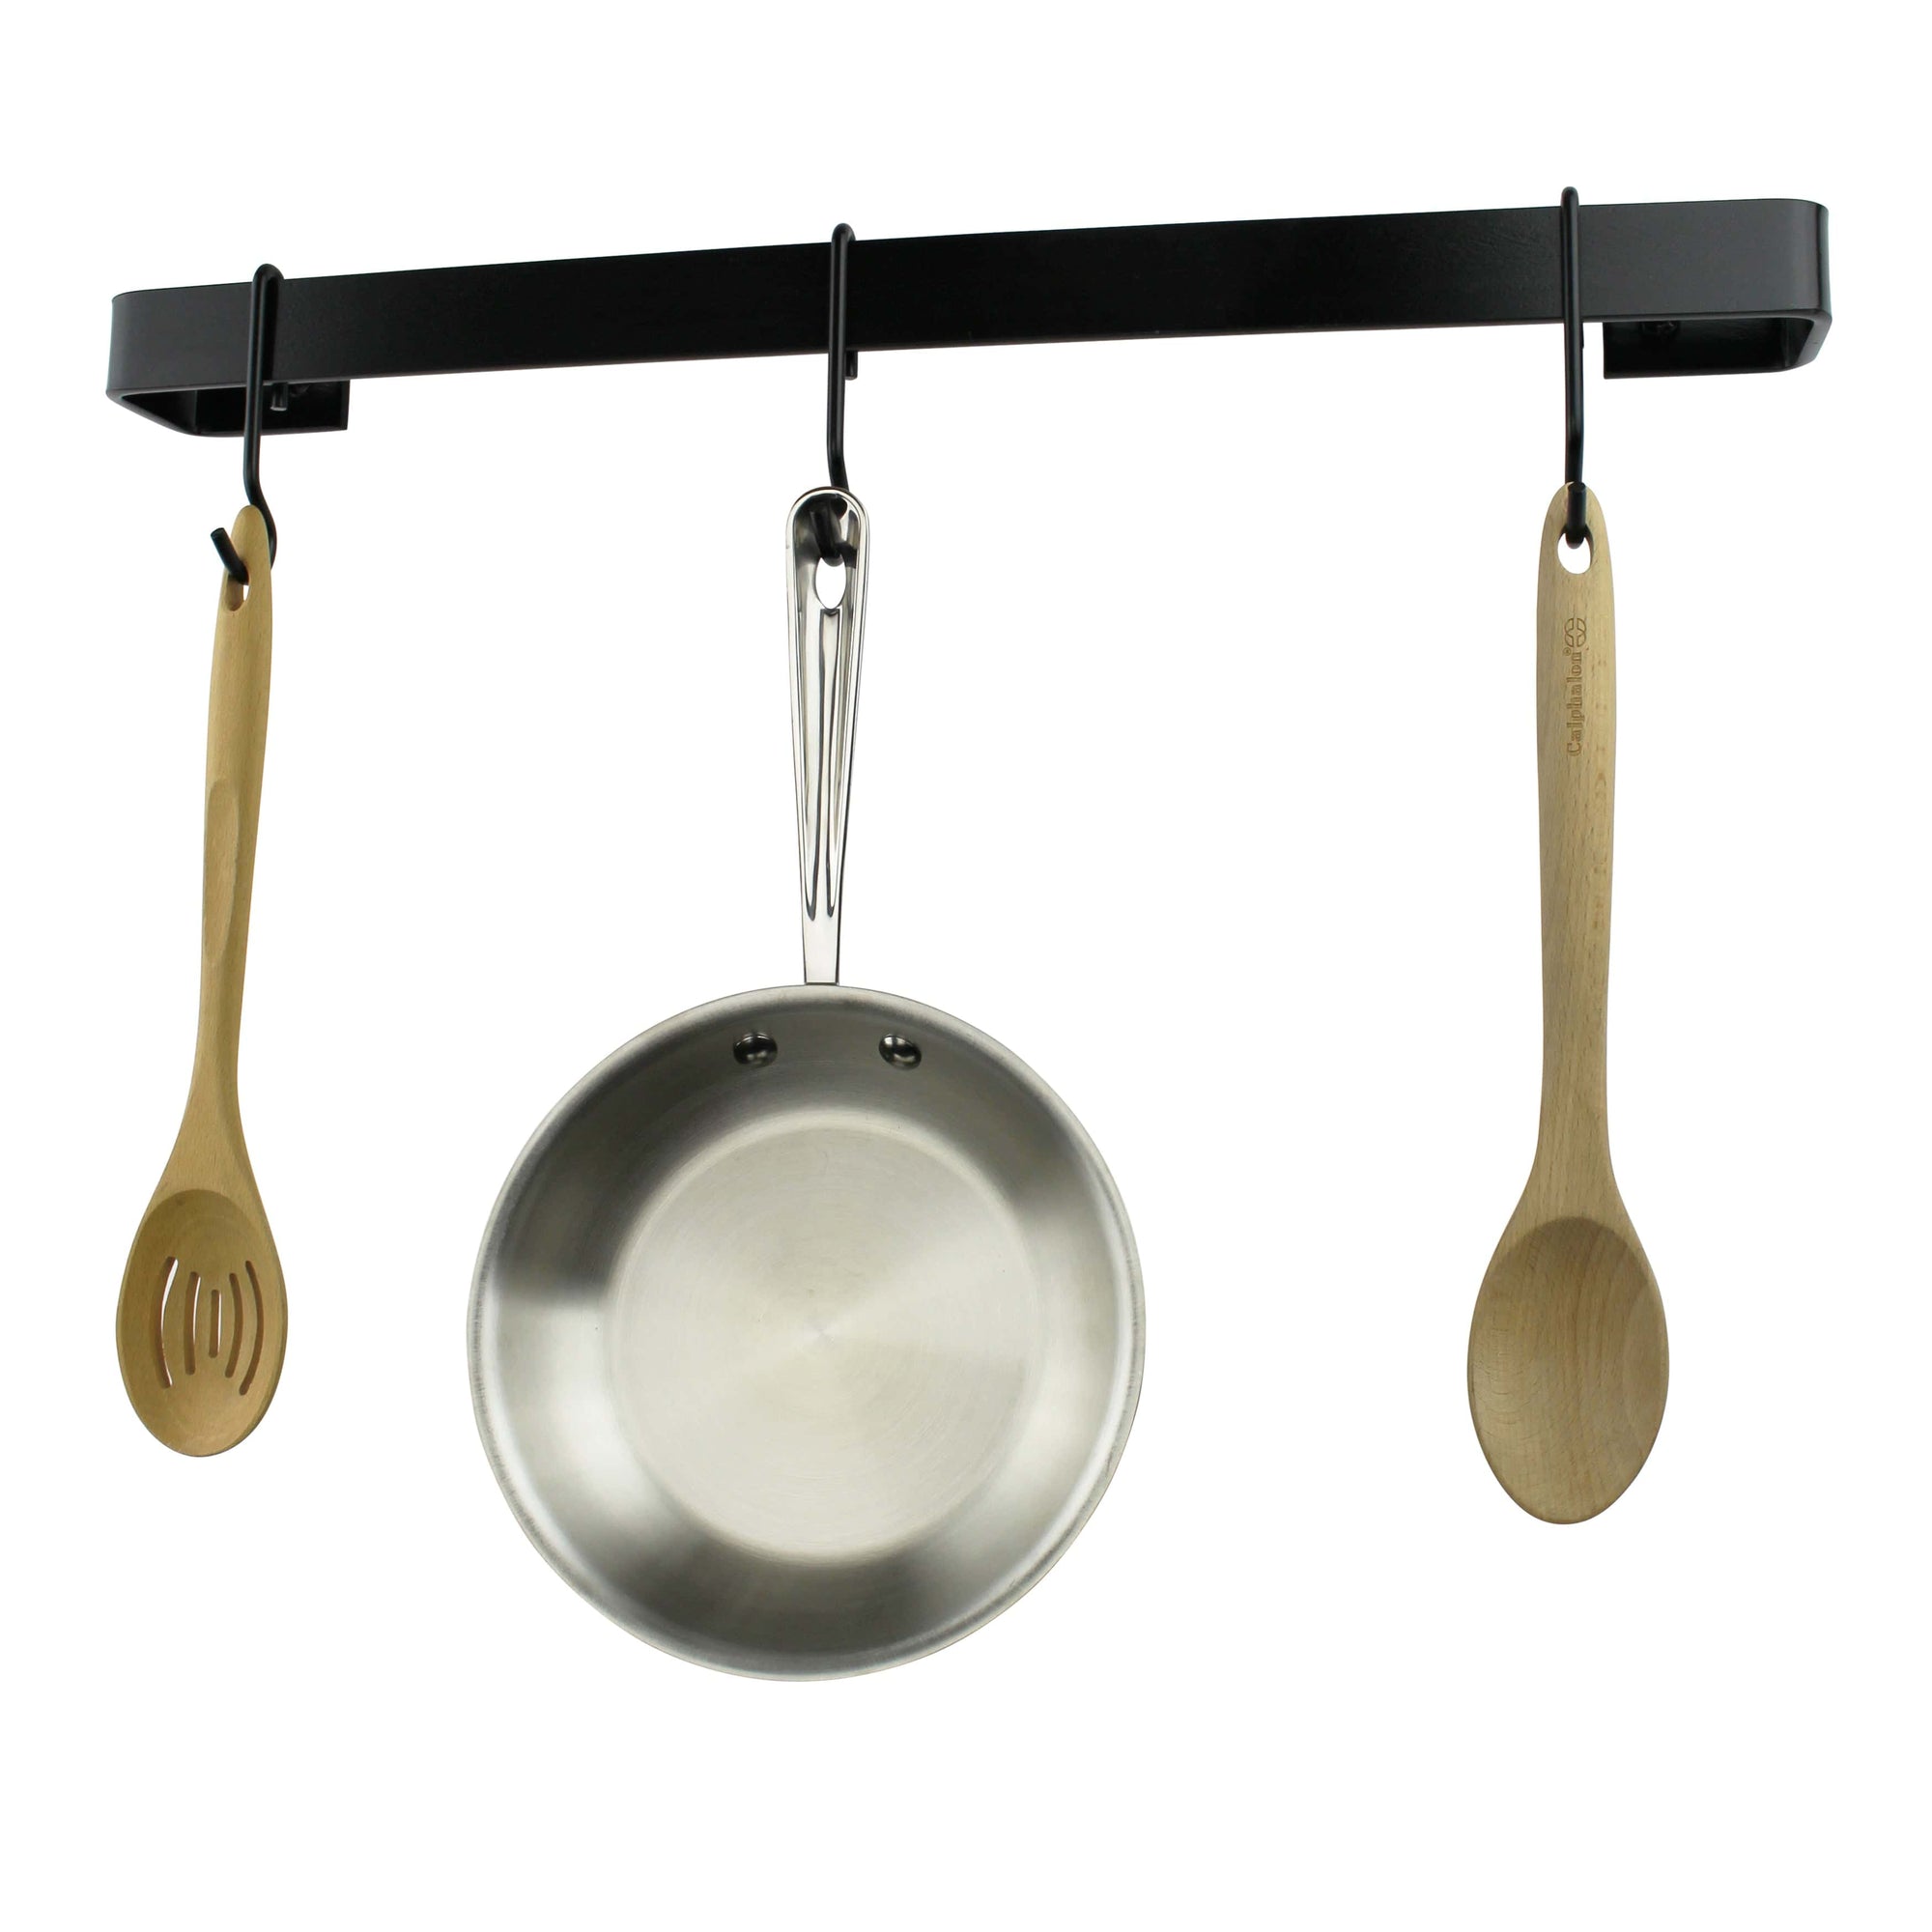 The BK Carbon Steel Skillet Is on Sale for $30 at